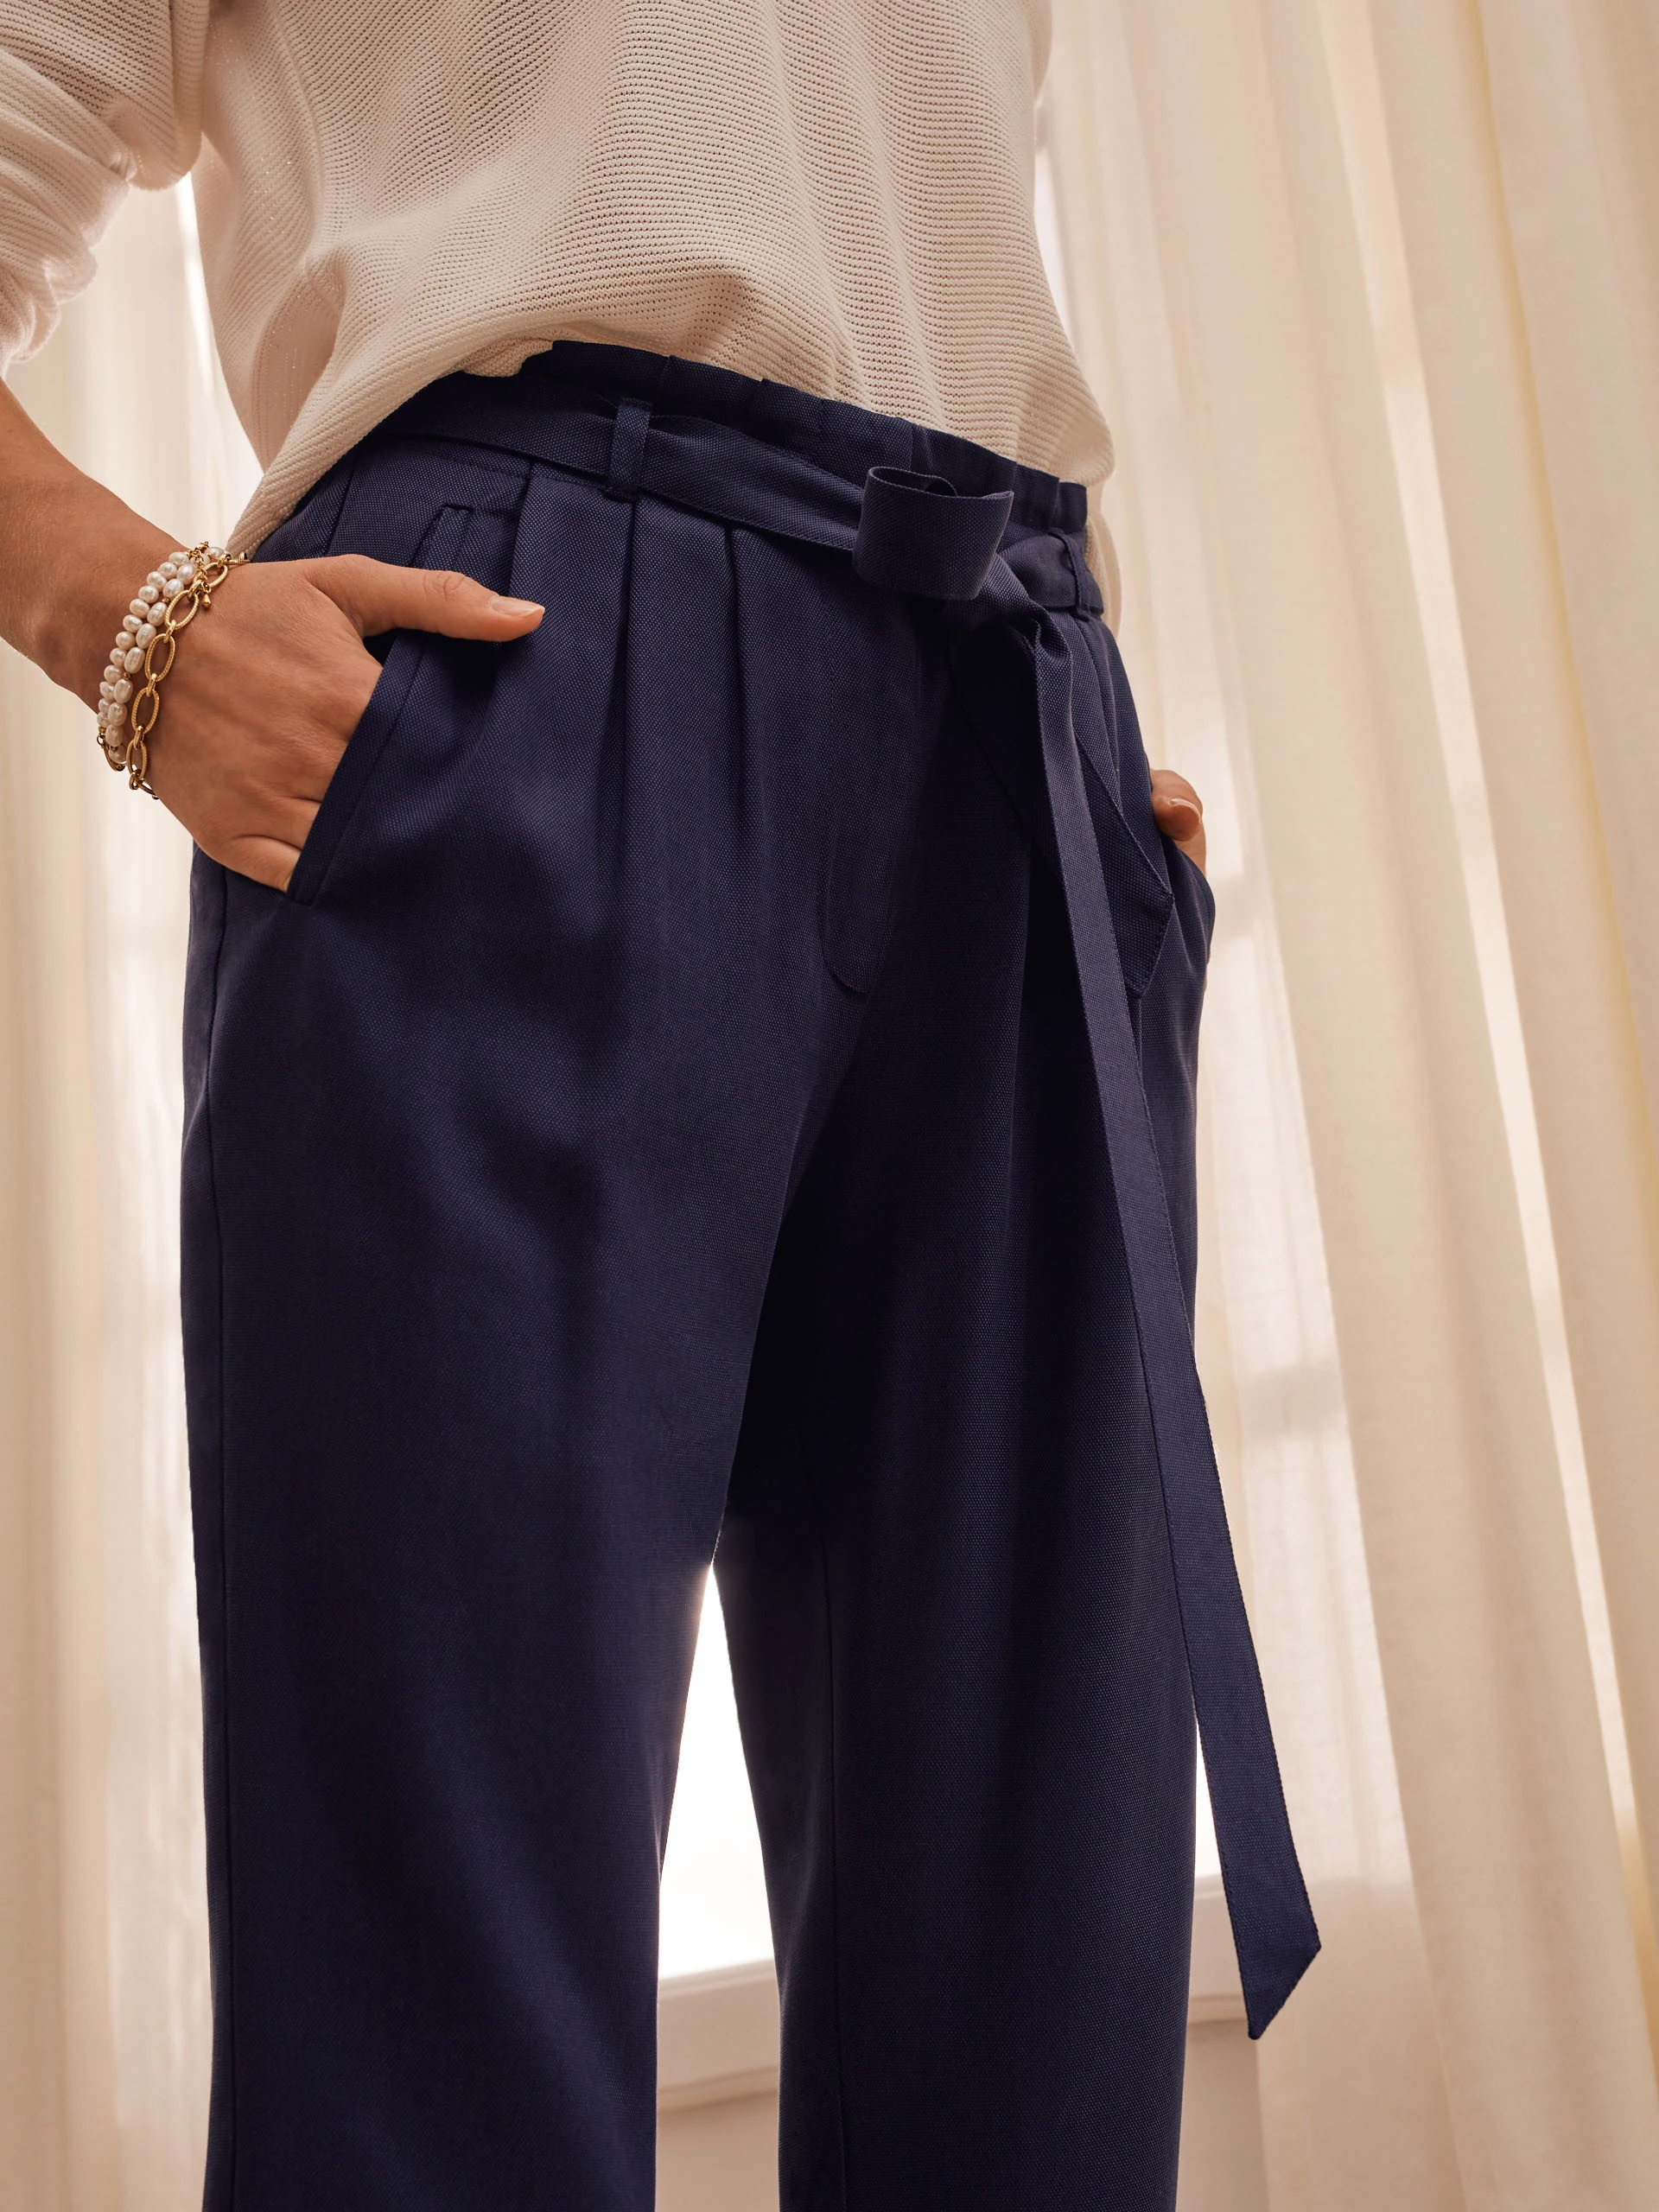 NAVY BLUE PANTS WITH TIE